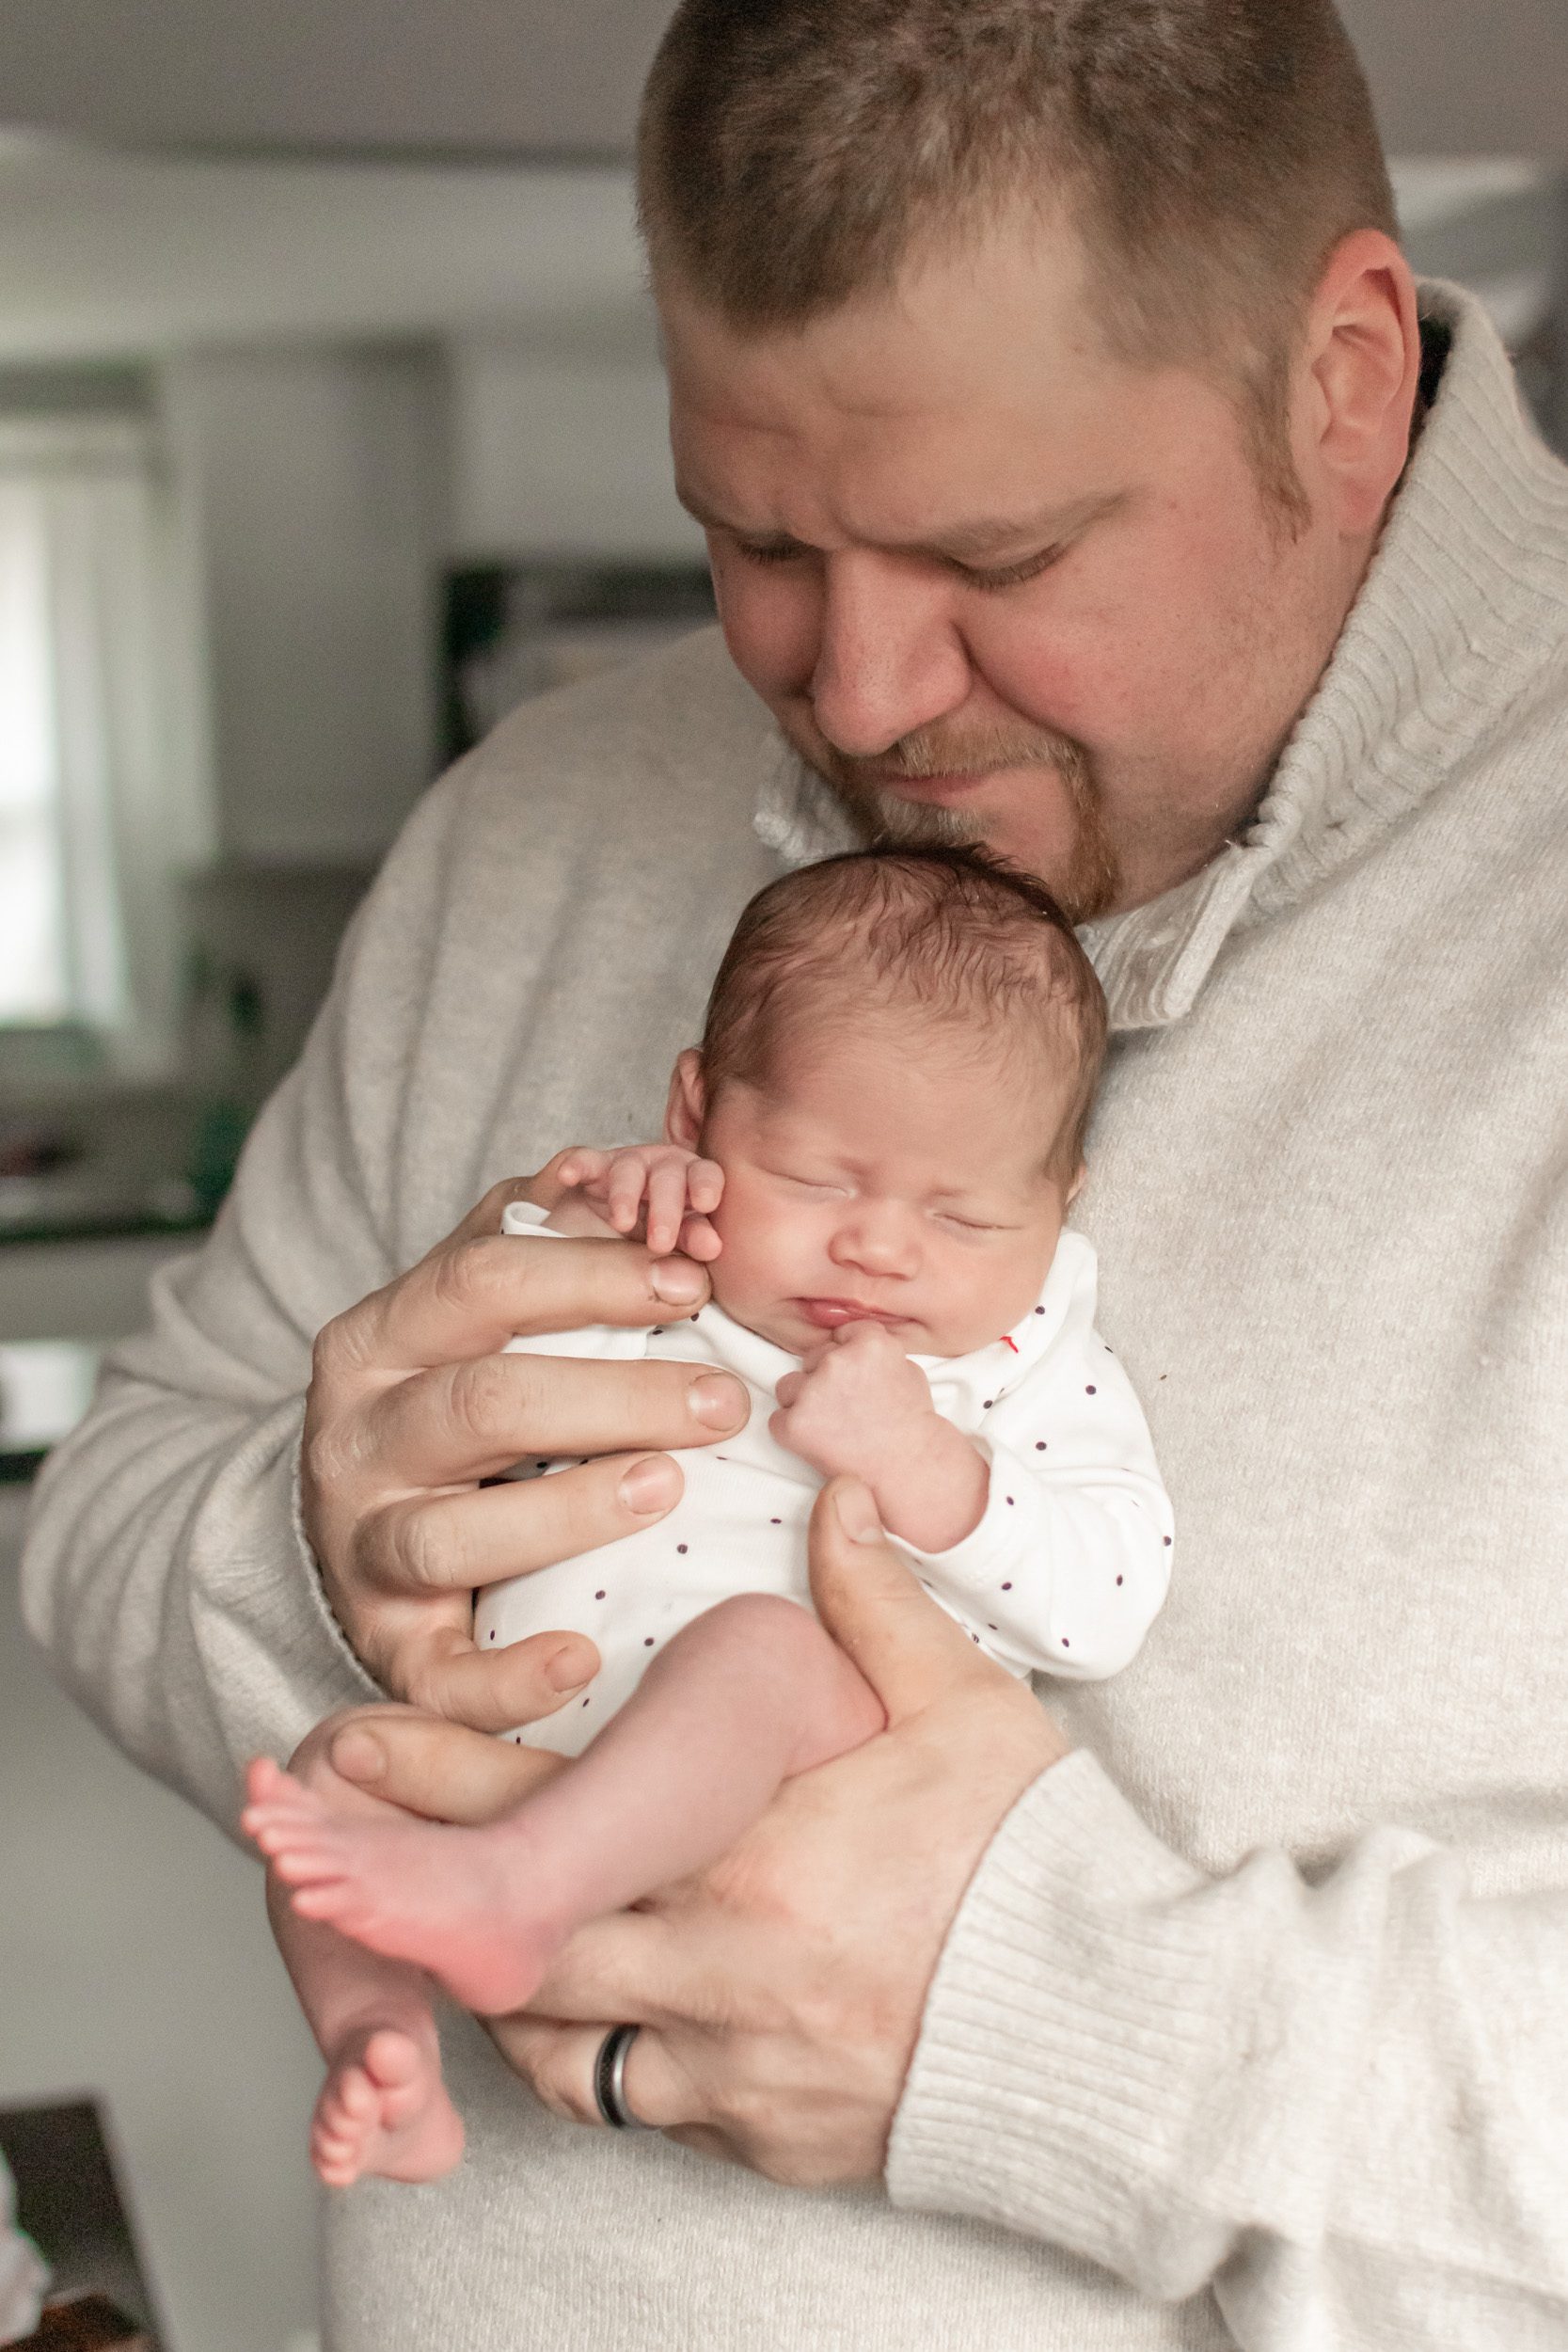 Newborn photo of dad holding his baby girl and looking down at her during a natural newborn photo session